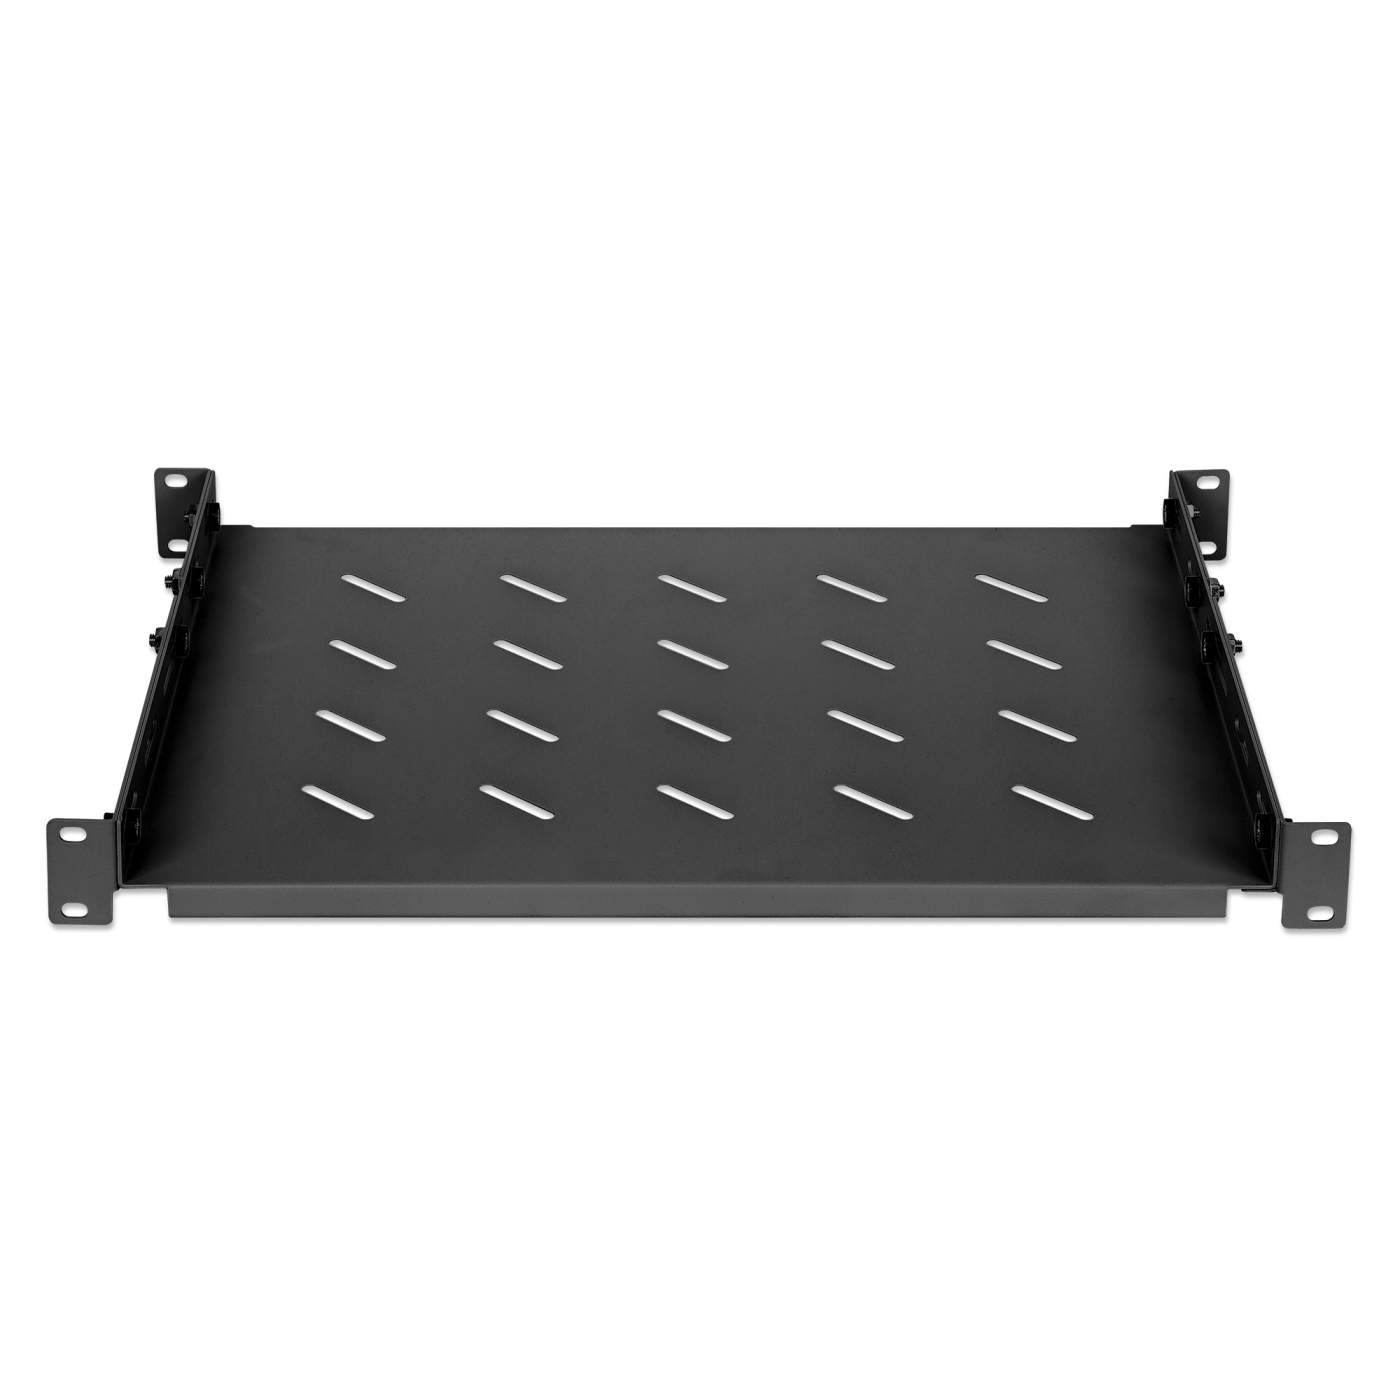 19" Shelf with Variable Rails for Fixed Mounting Image 3